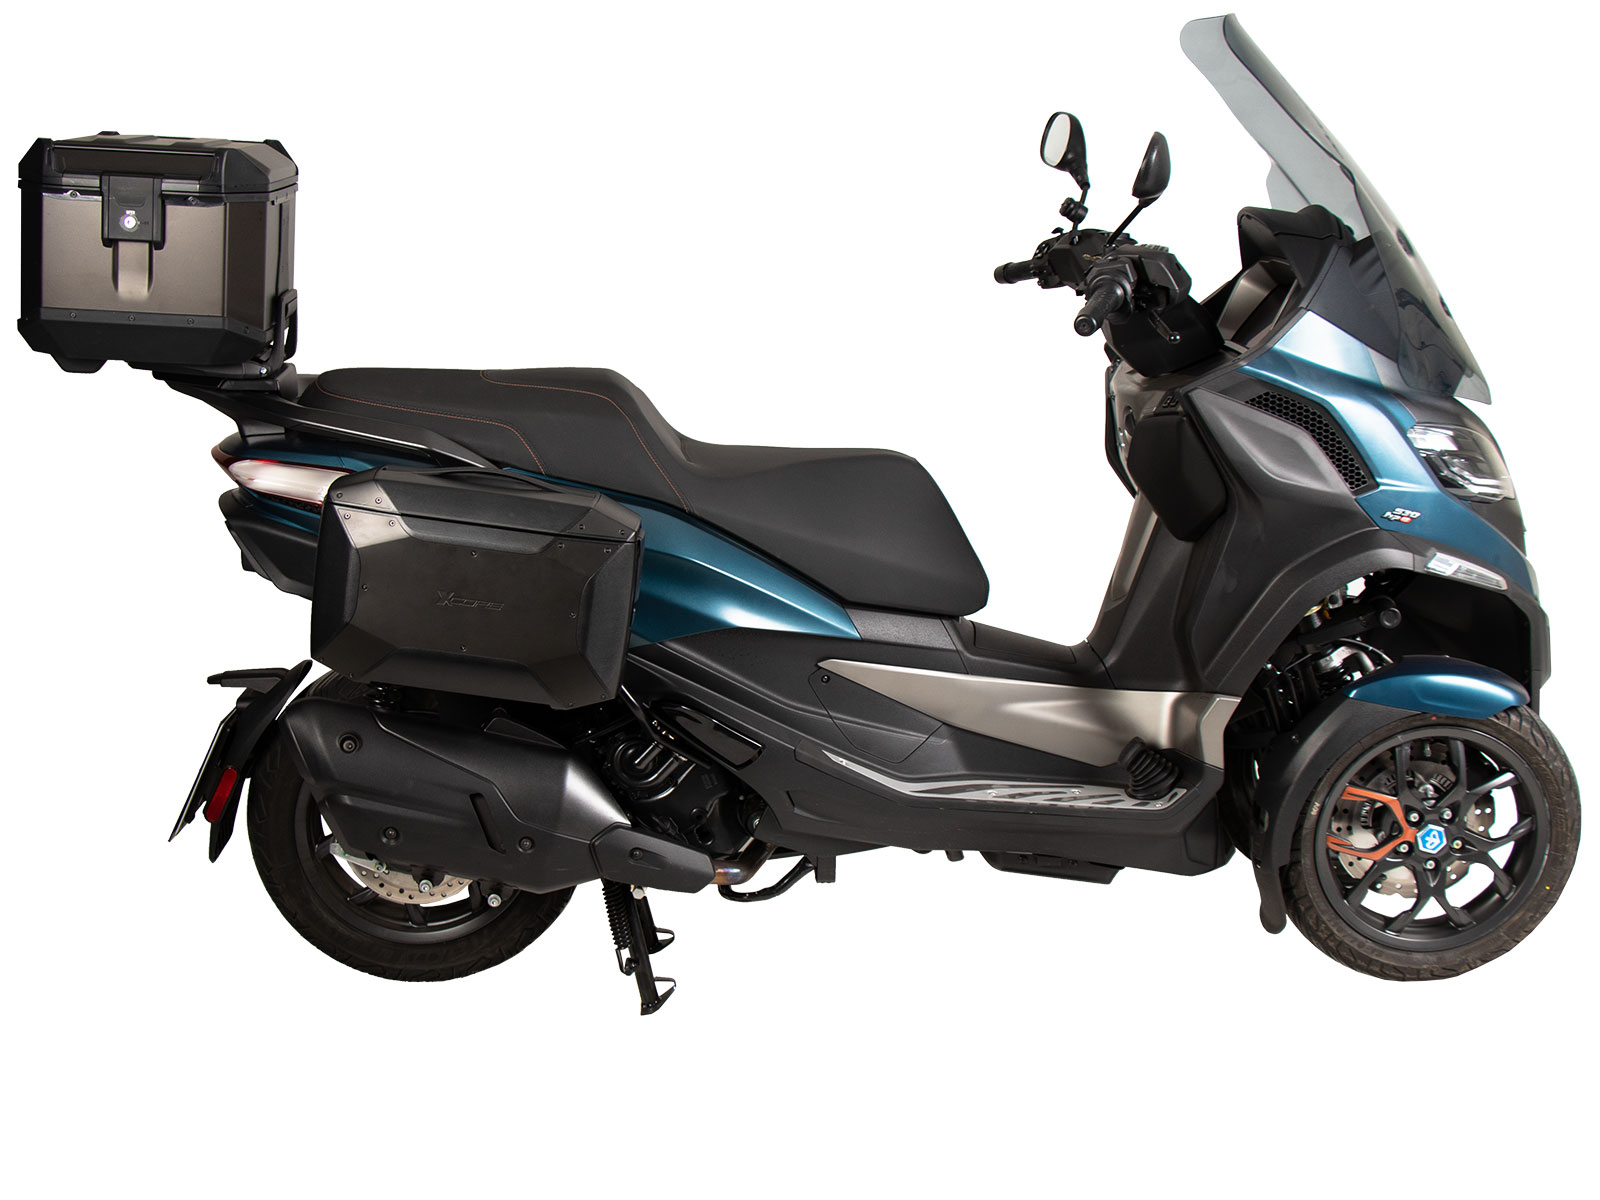 Alurack top case carrier black for combination with original rear rack for Piaggio MP3 400 / Sport 400